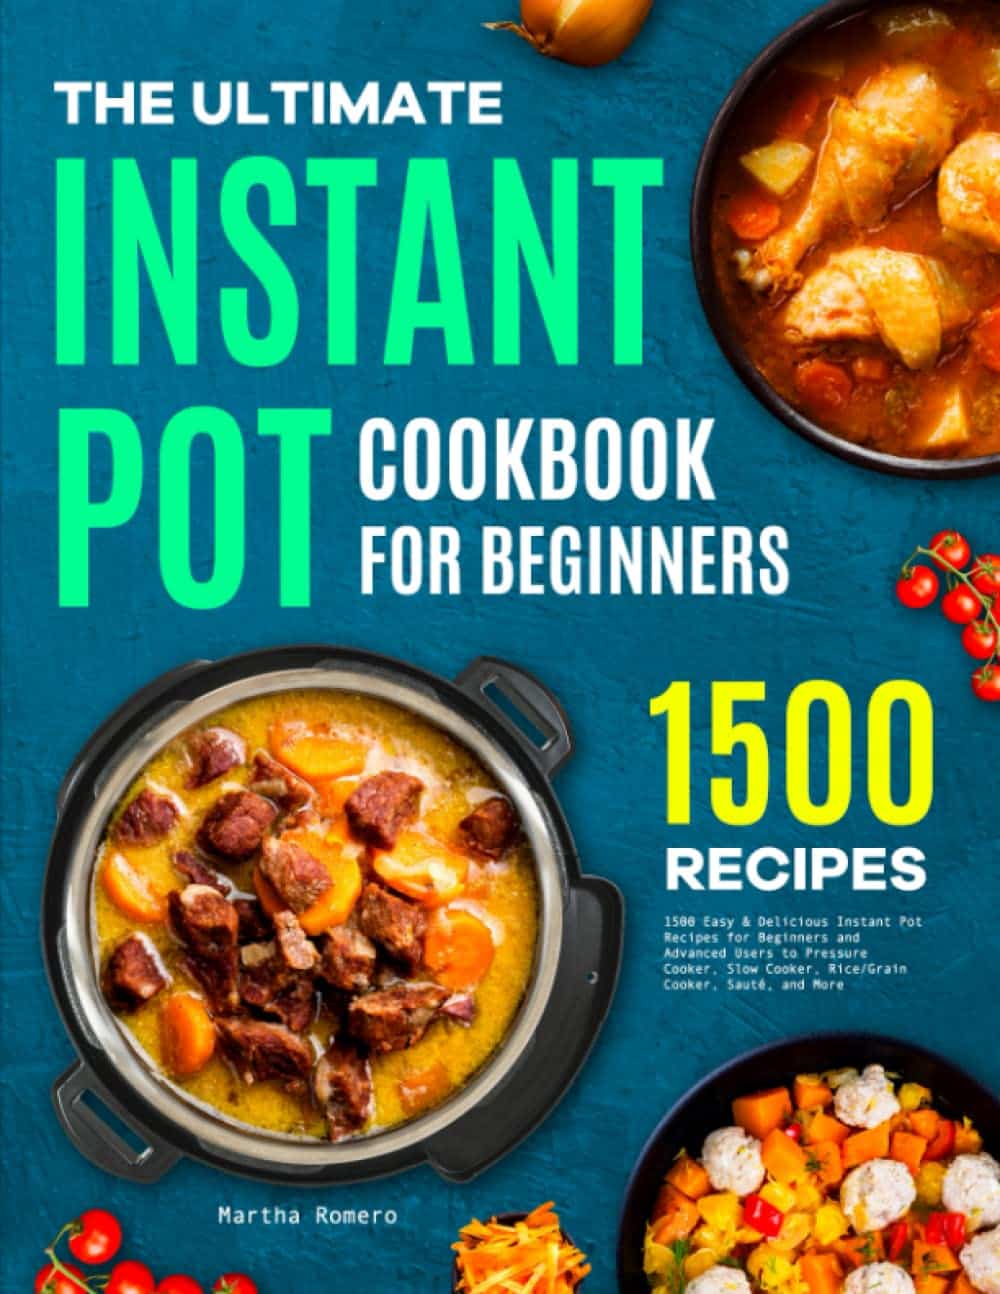 The Ultimate Instant Pot Cookbook with photos of curry and other dishes